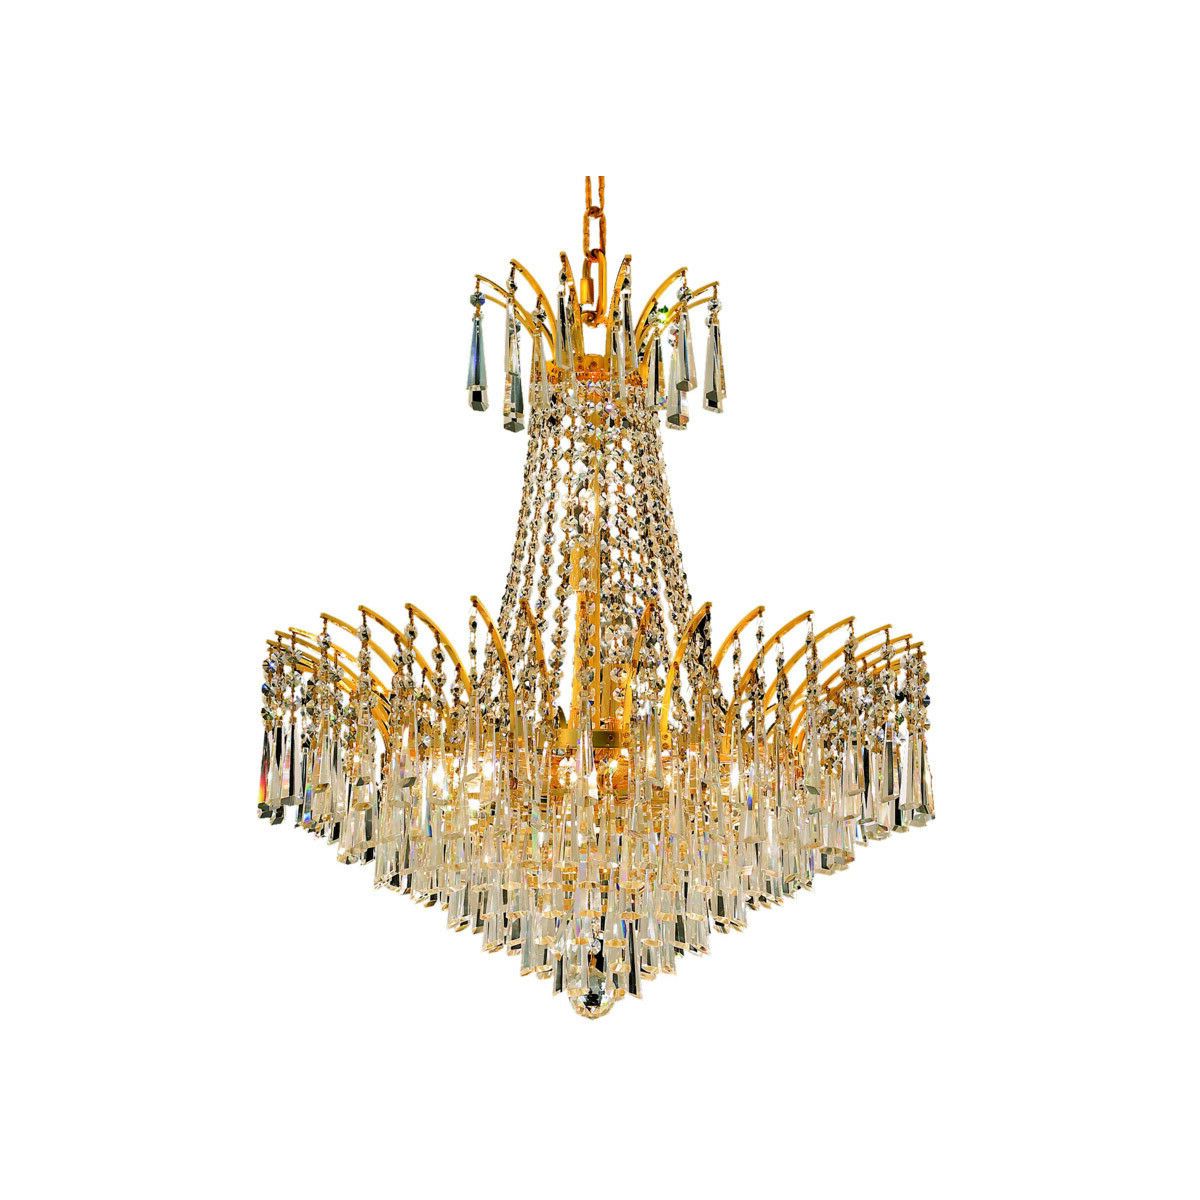 Best And Newest Chandeliers :: Palace Flamingo 11 Light Crystal Chandelier Within Clear Crystal Chandeliers (View 11 of 15)